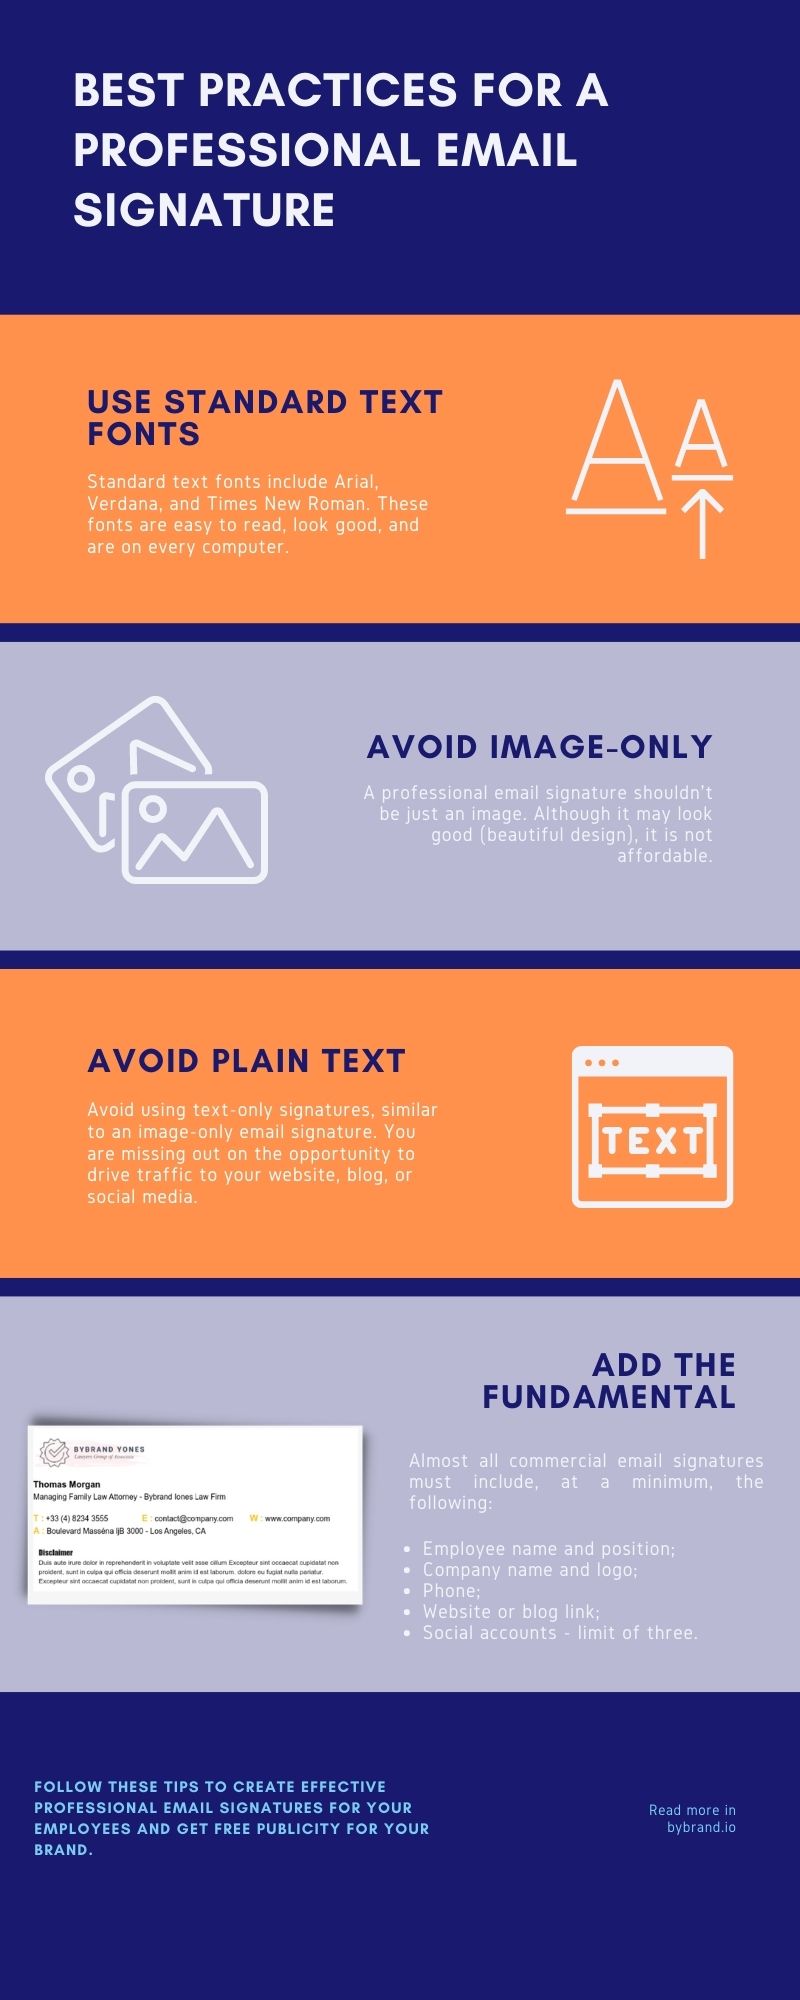 Infographic the best practices for a frofessional email signature